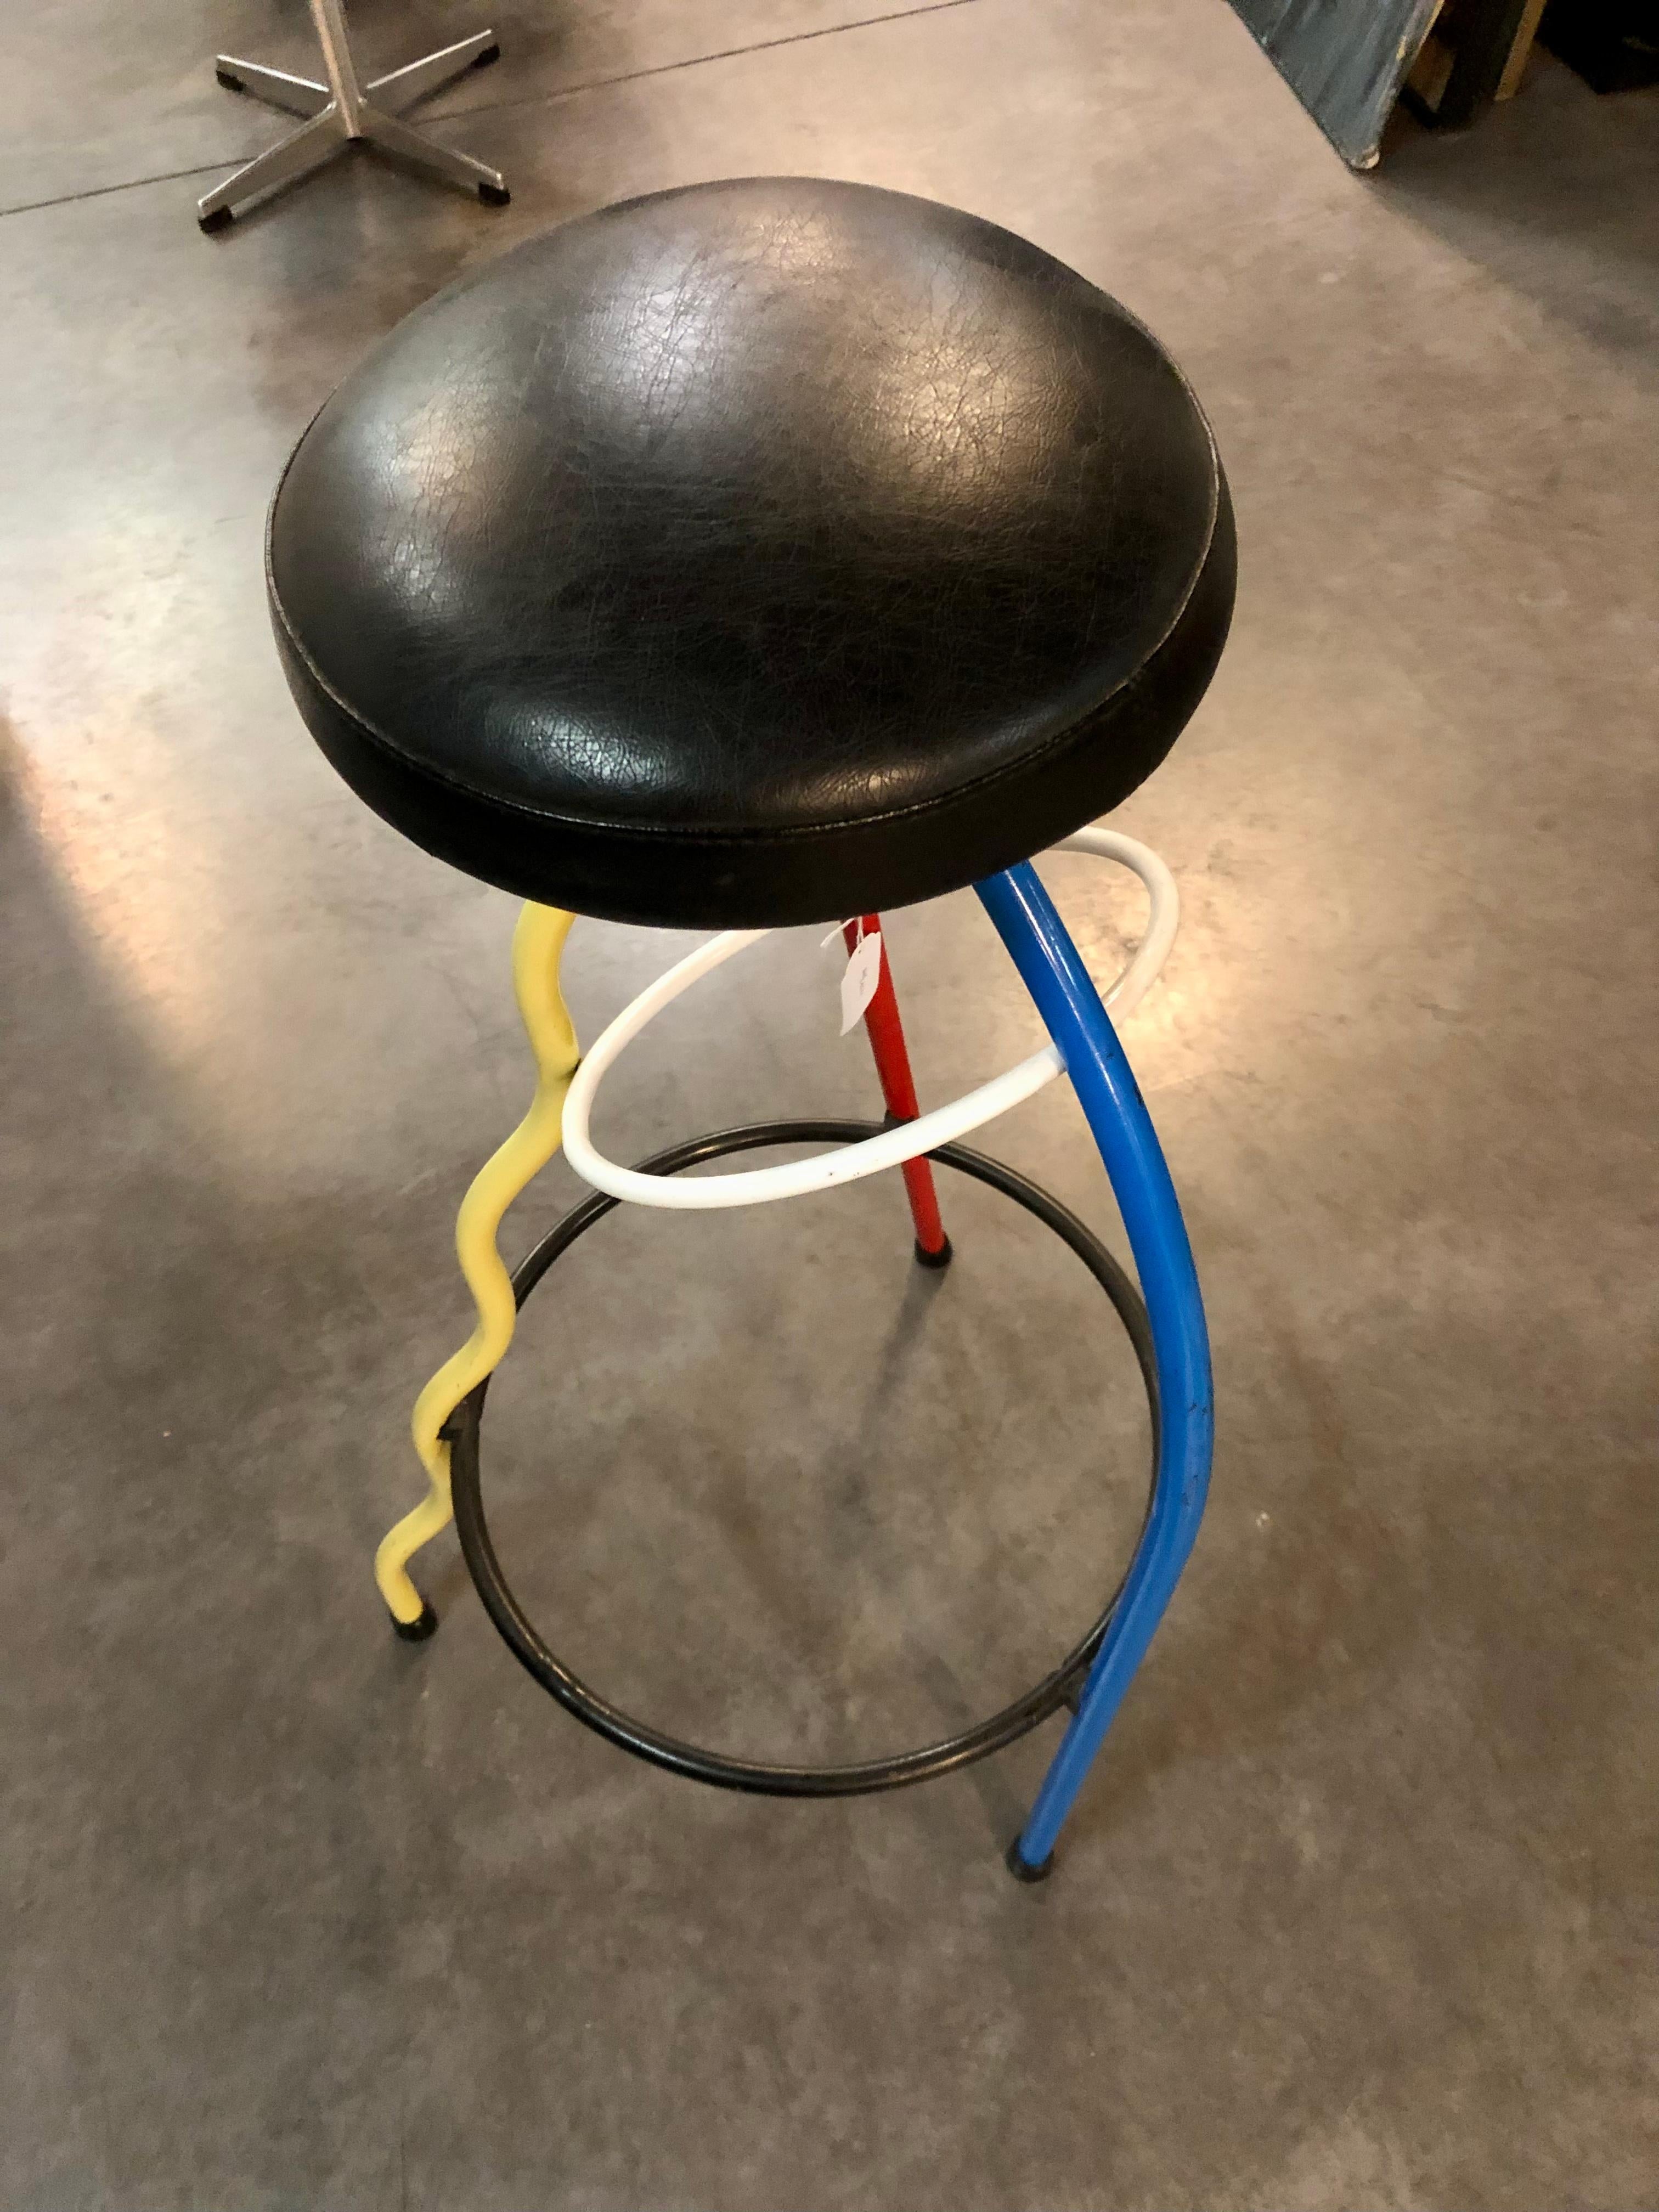 Old edition of iconic duplex stool by Javier Mariscal .
Made in beginning of the eighties for the duplex bar in Valence.